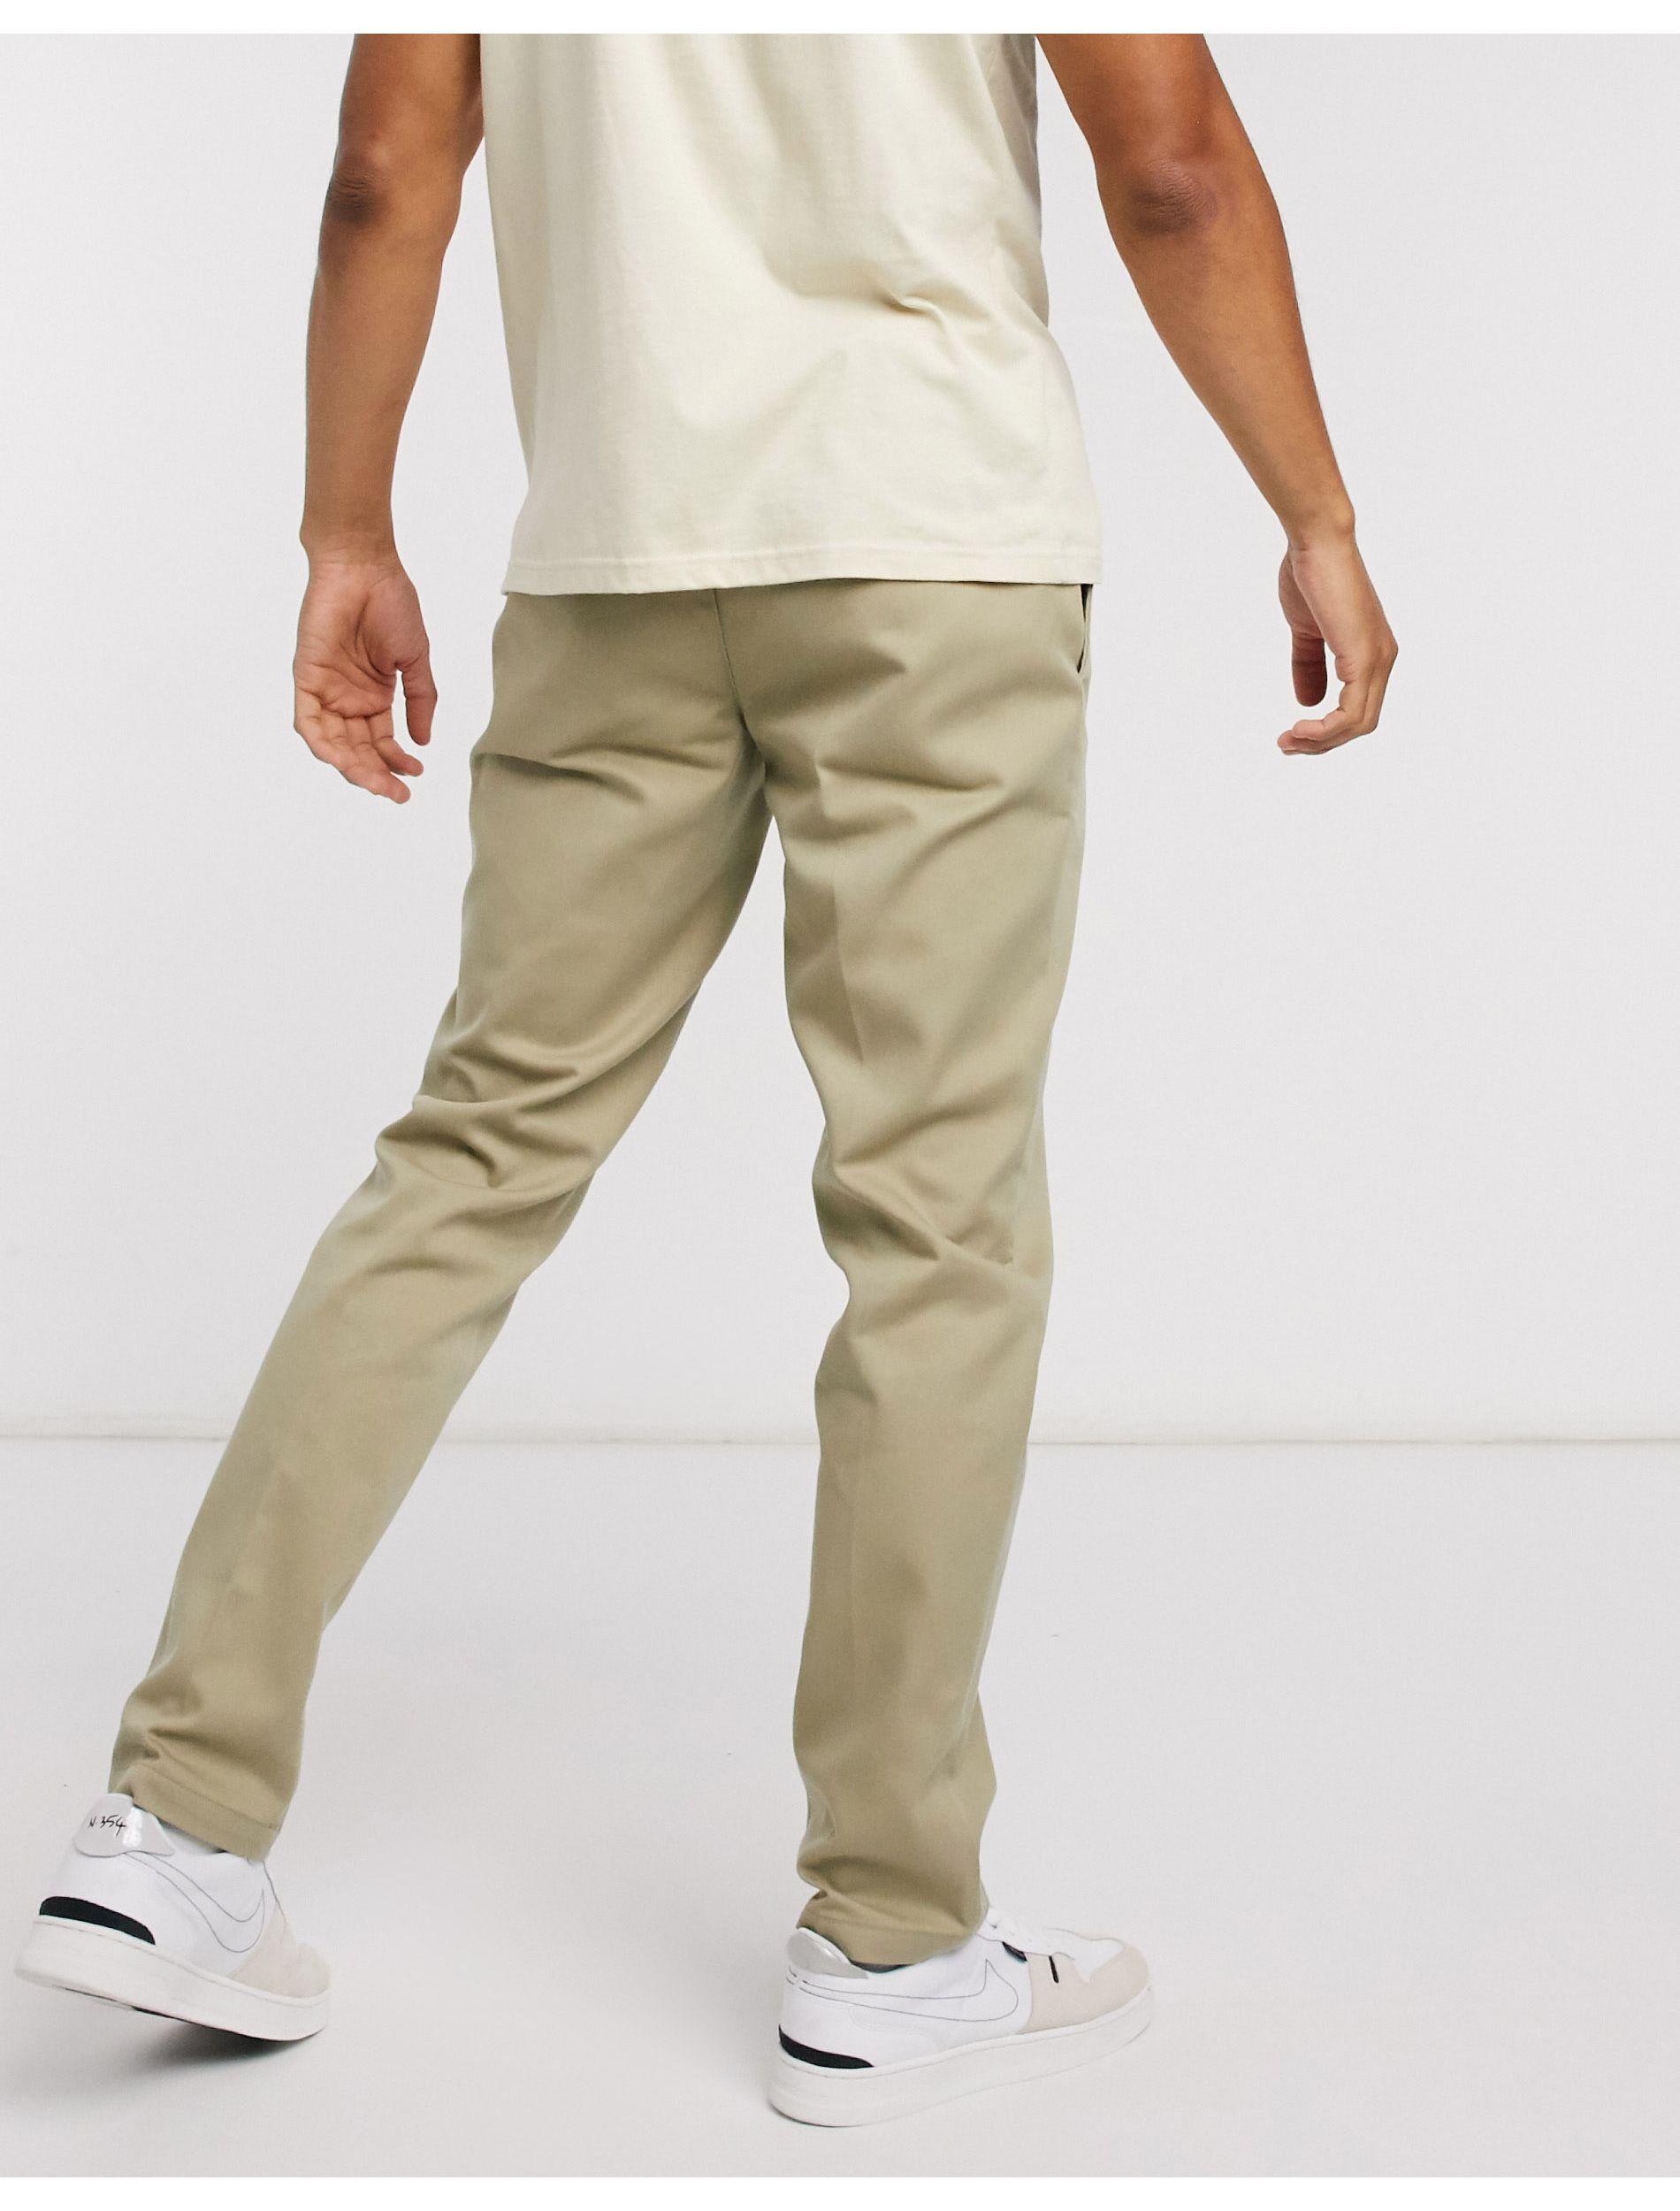 Dunlop On Site Trousers Mens | SportsDirect.com USA